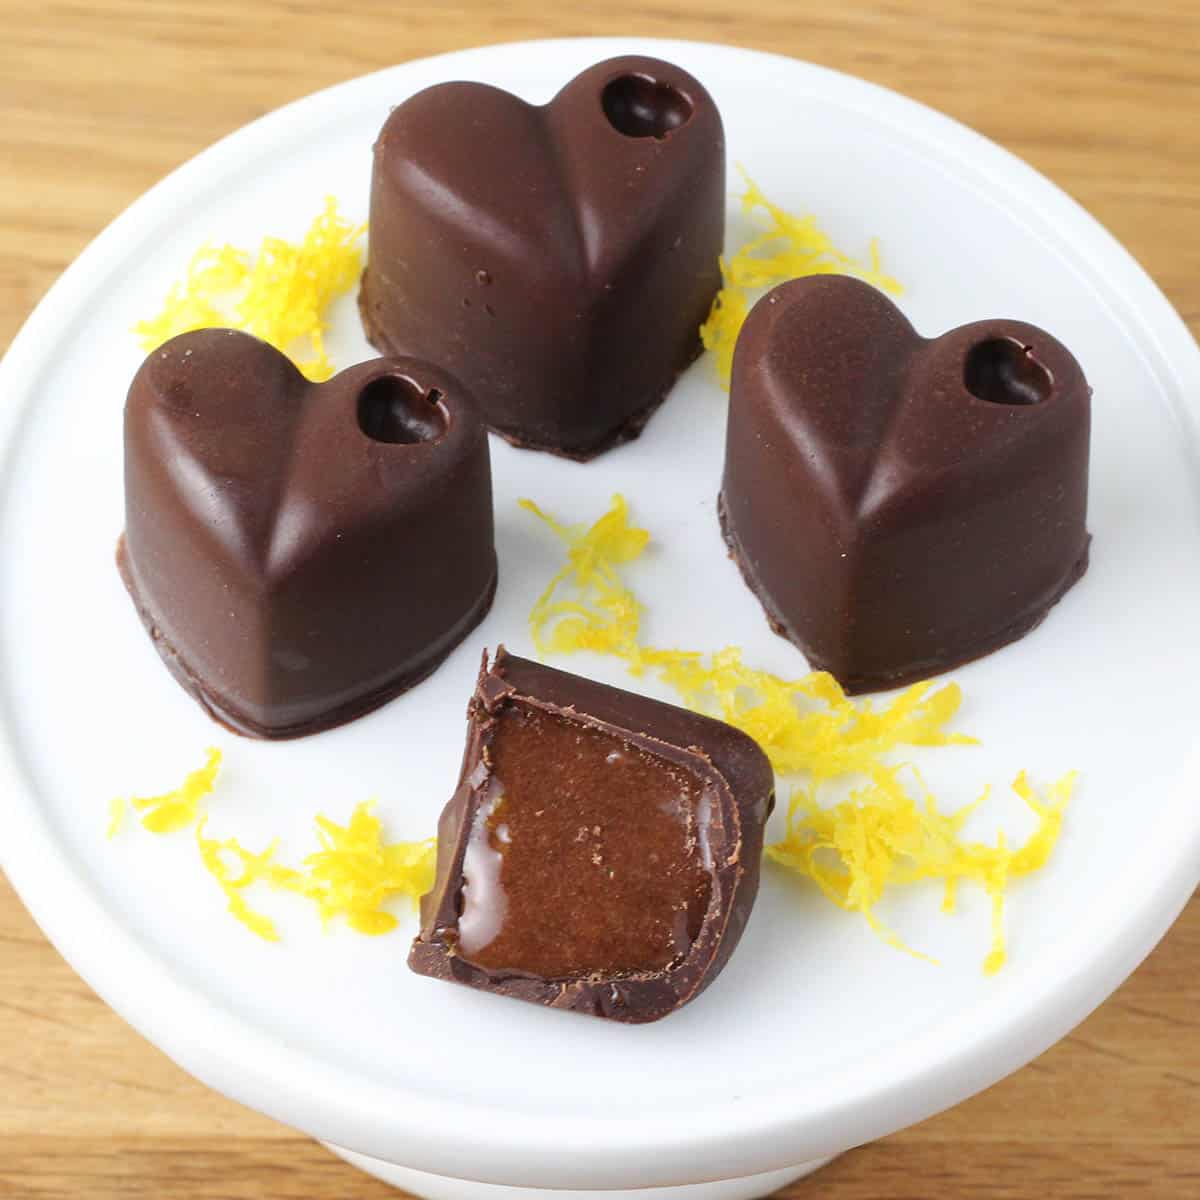 three full and one half chocolate heart filled with chocolate orange whey filling and orange zest on a small cupcake stand on a wood table